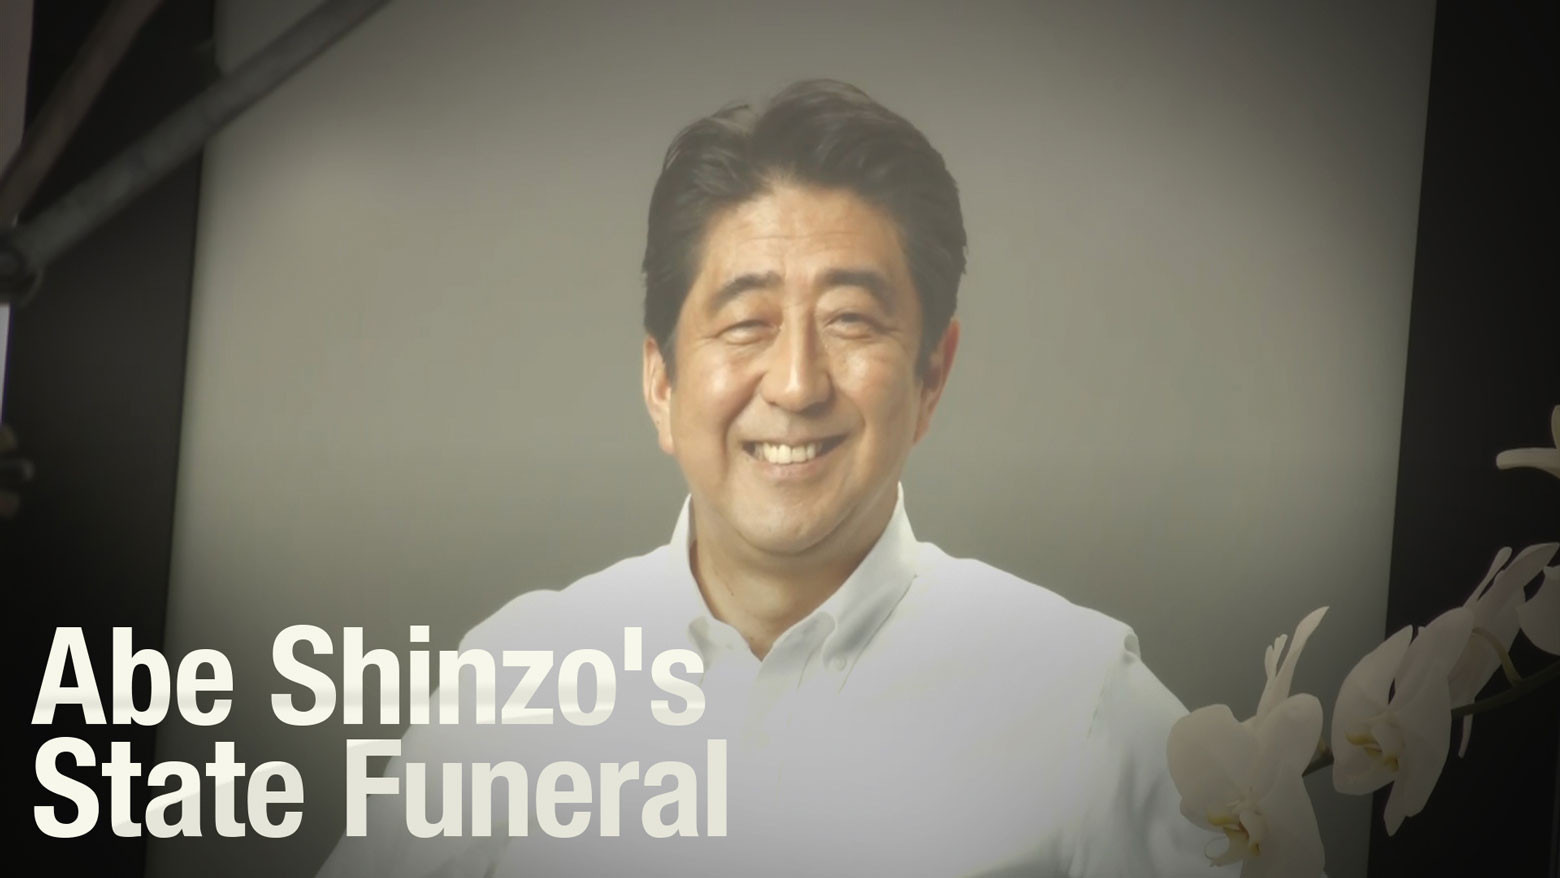 As it happened: Abe Shinzo's state funeral